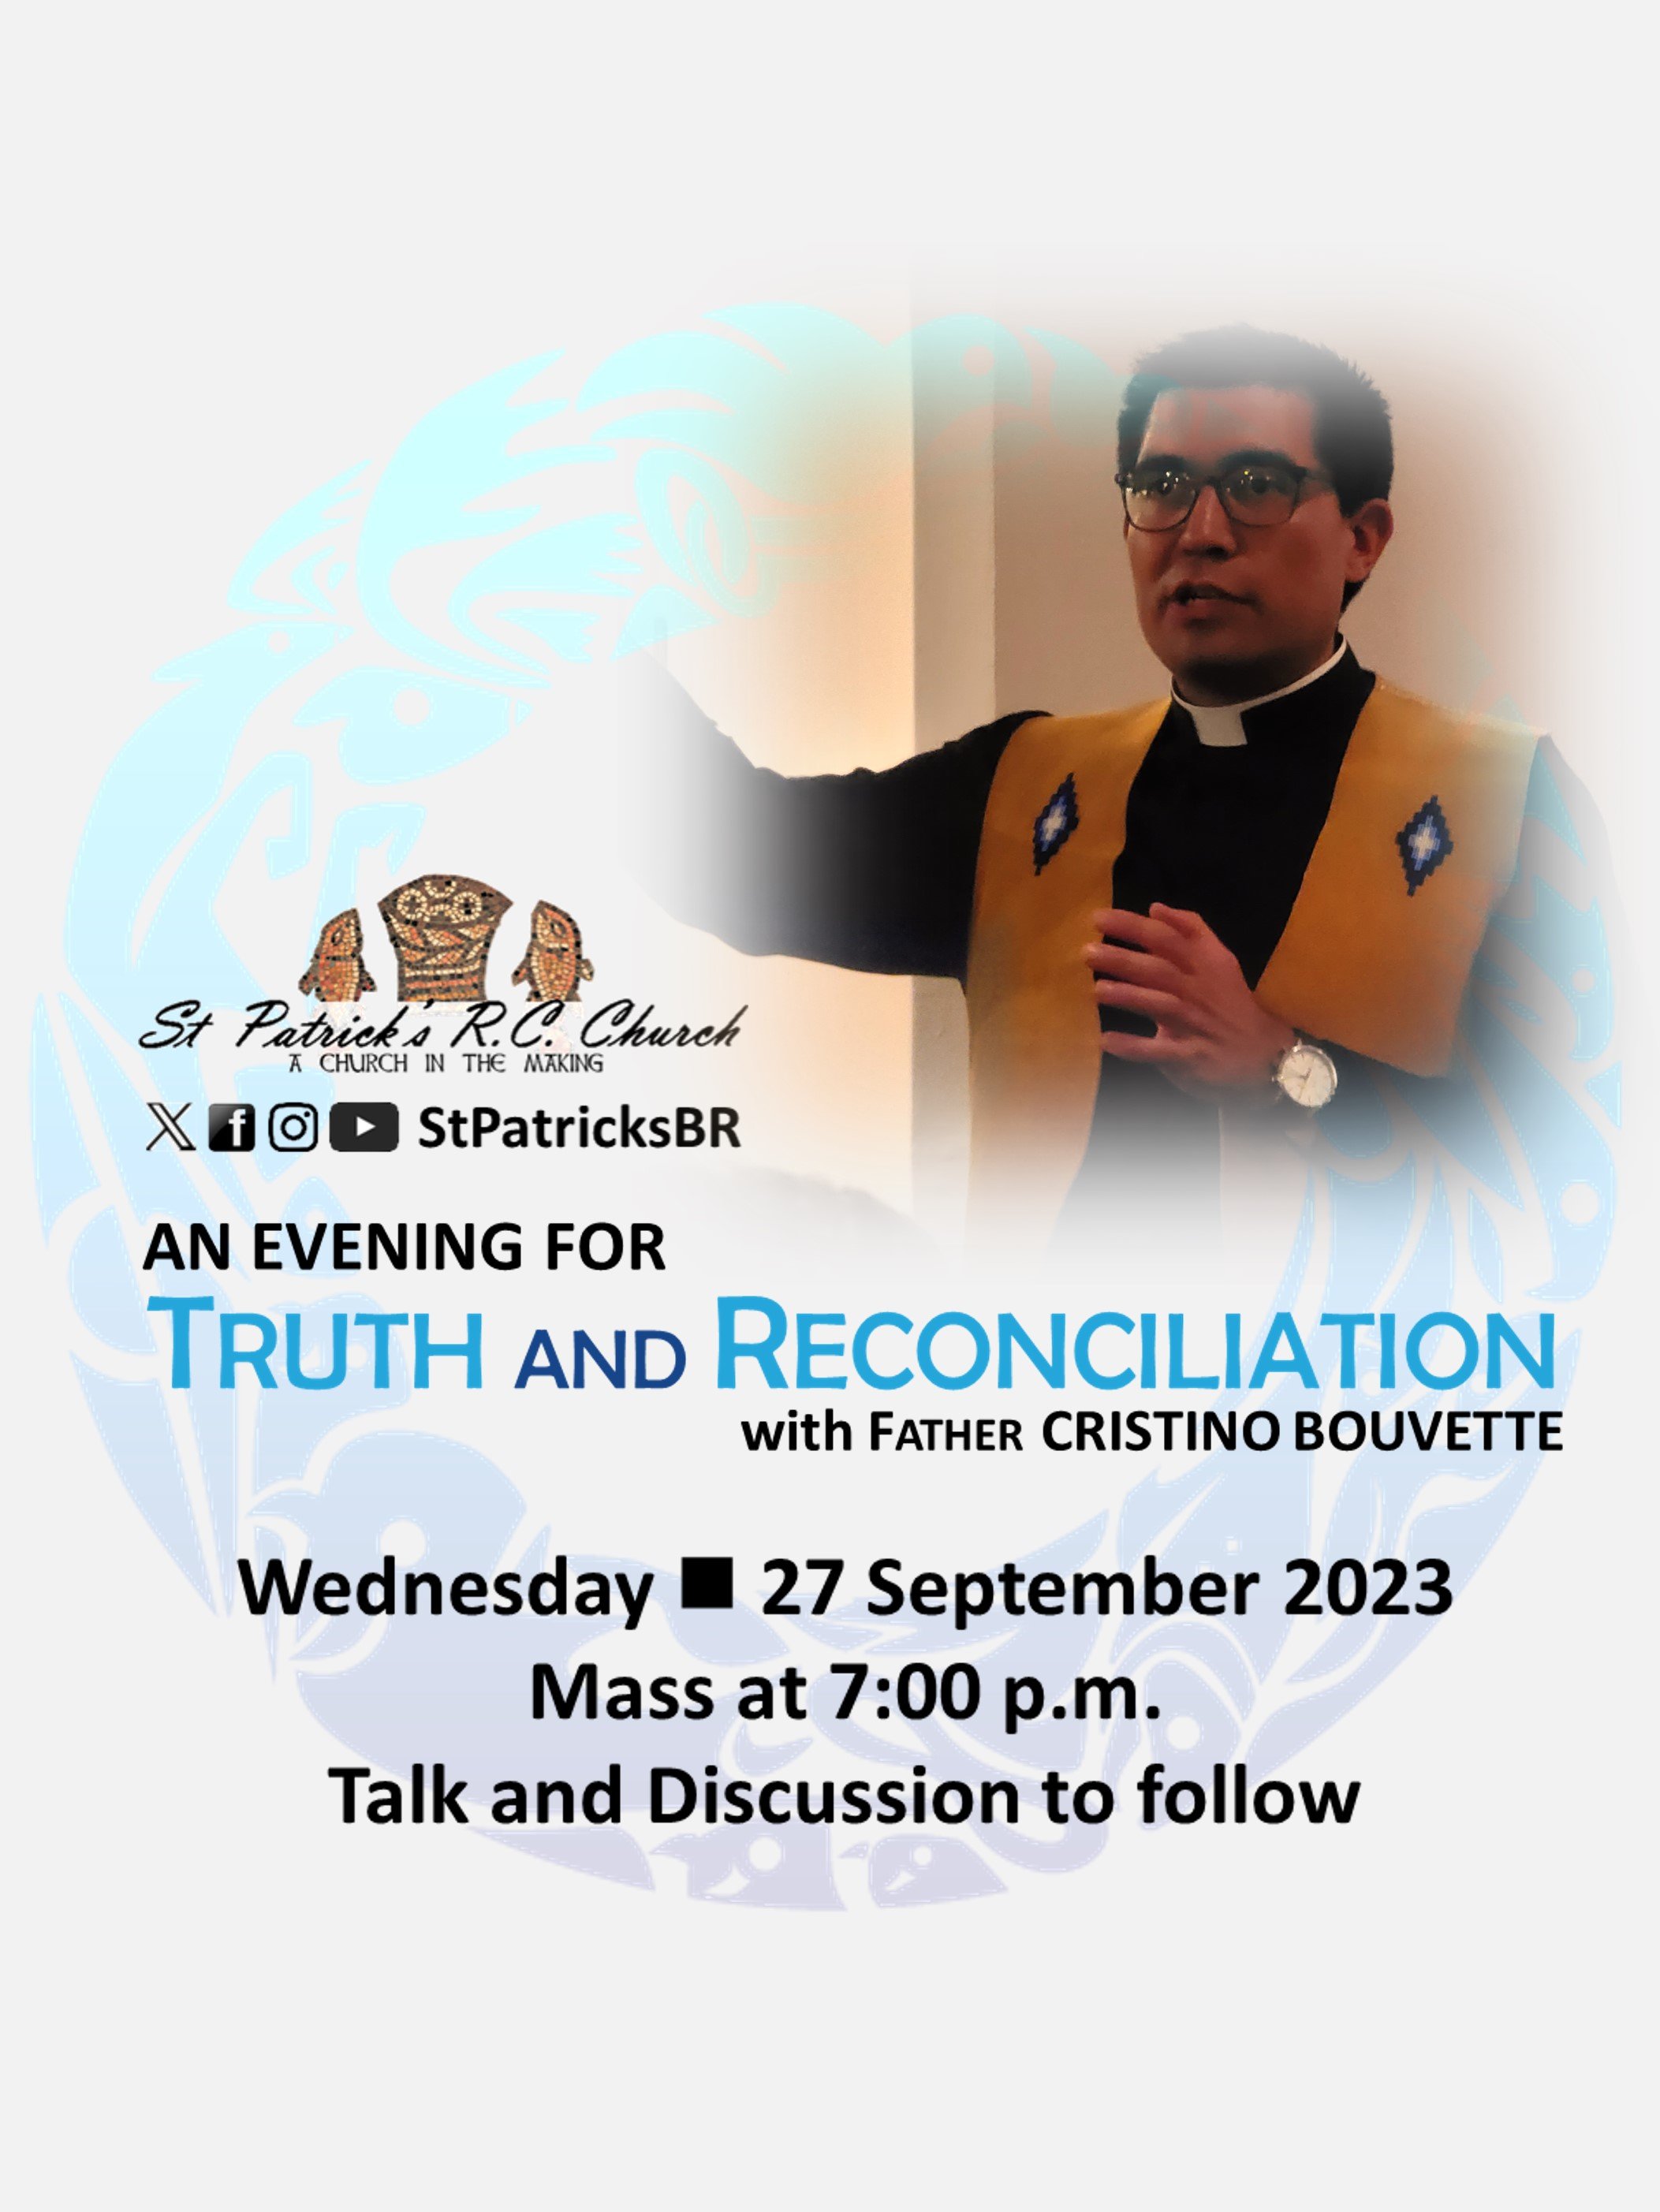 Story: An Evening for Truth and Reconciliation